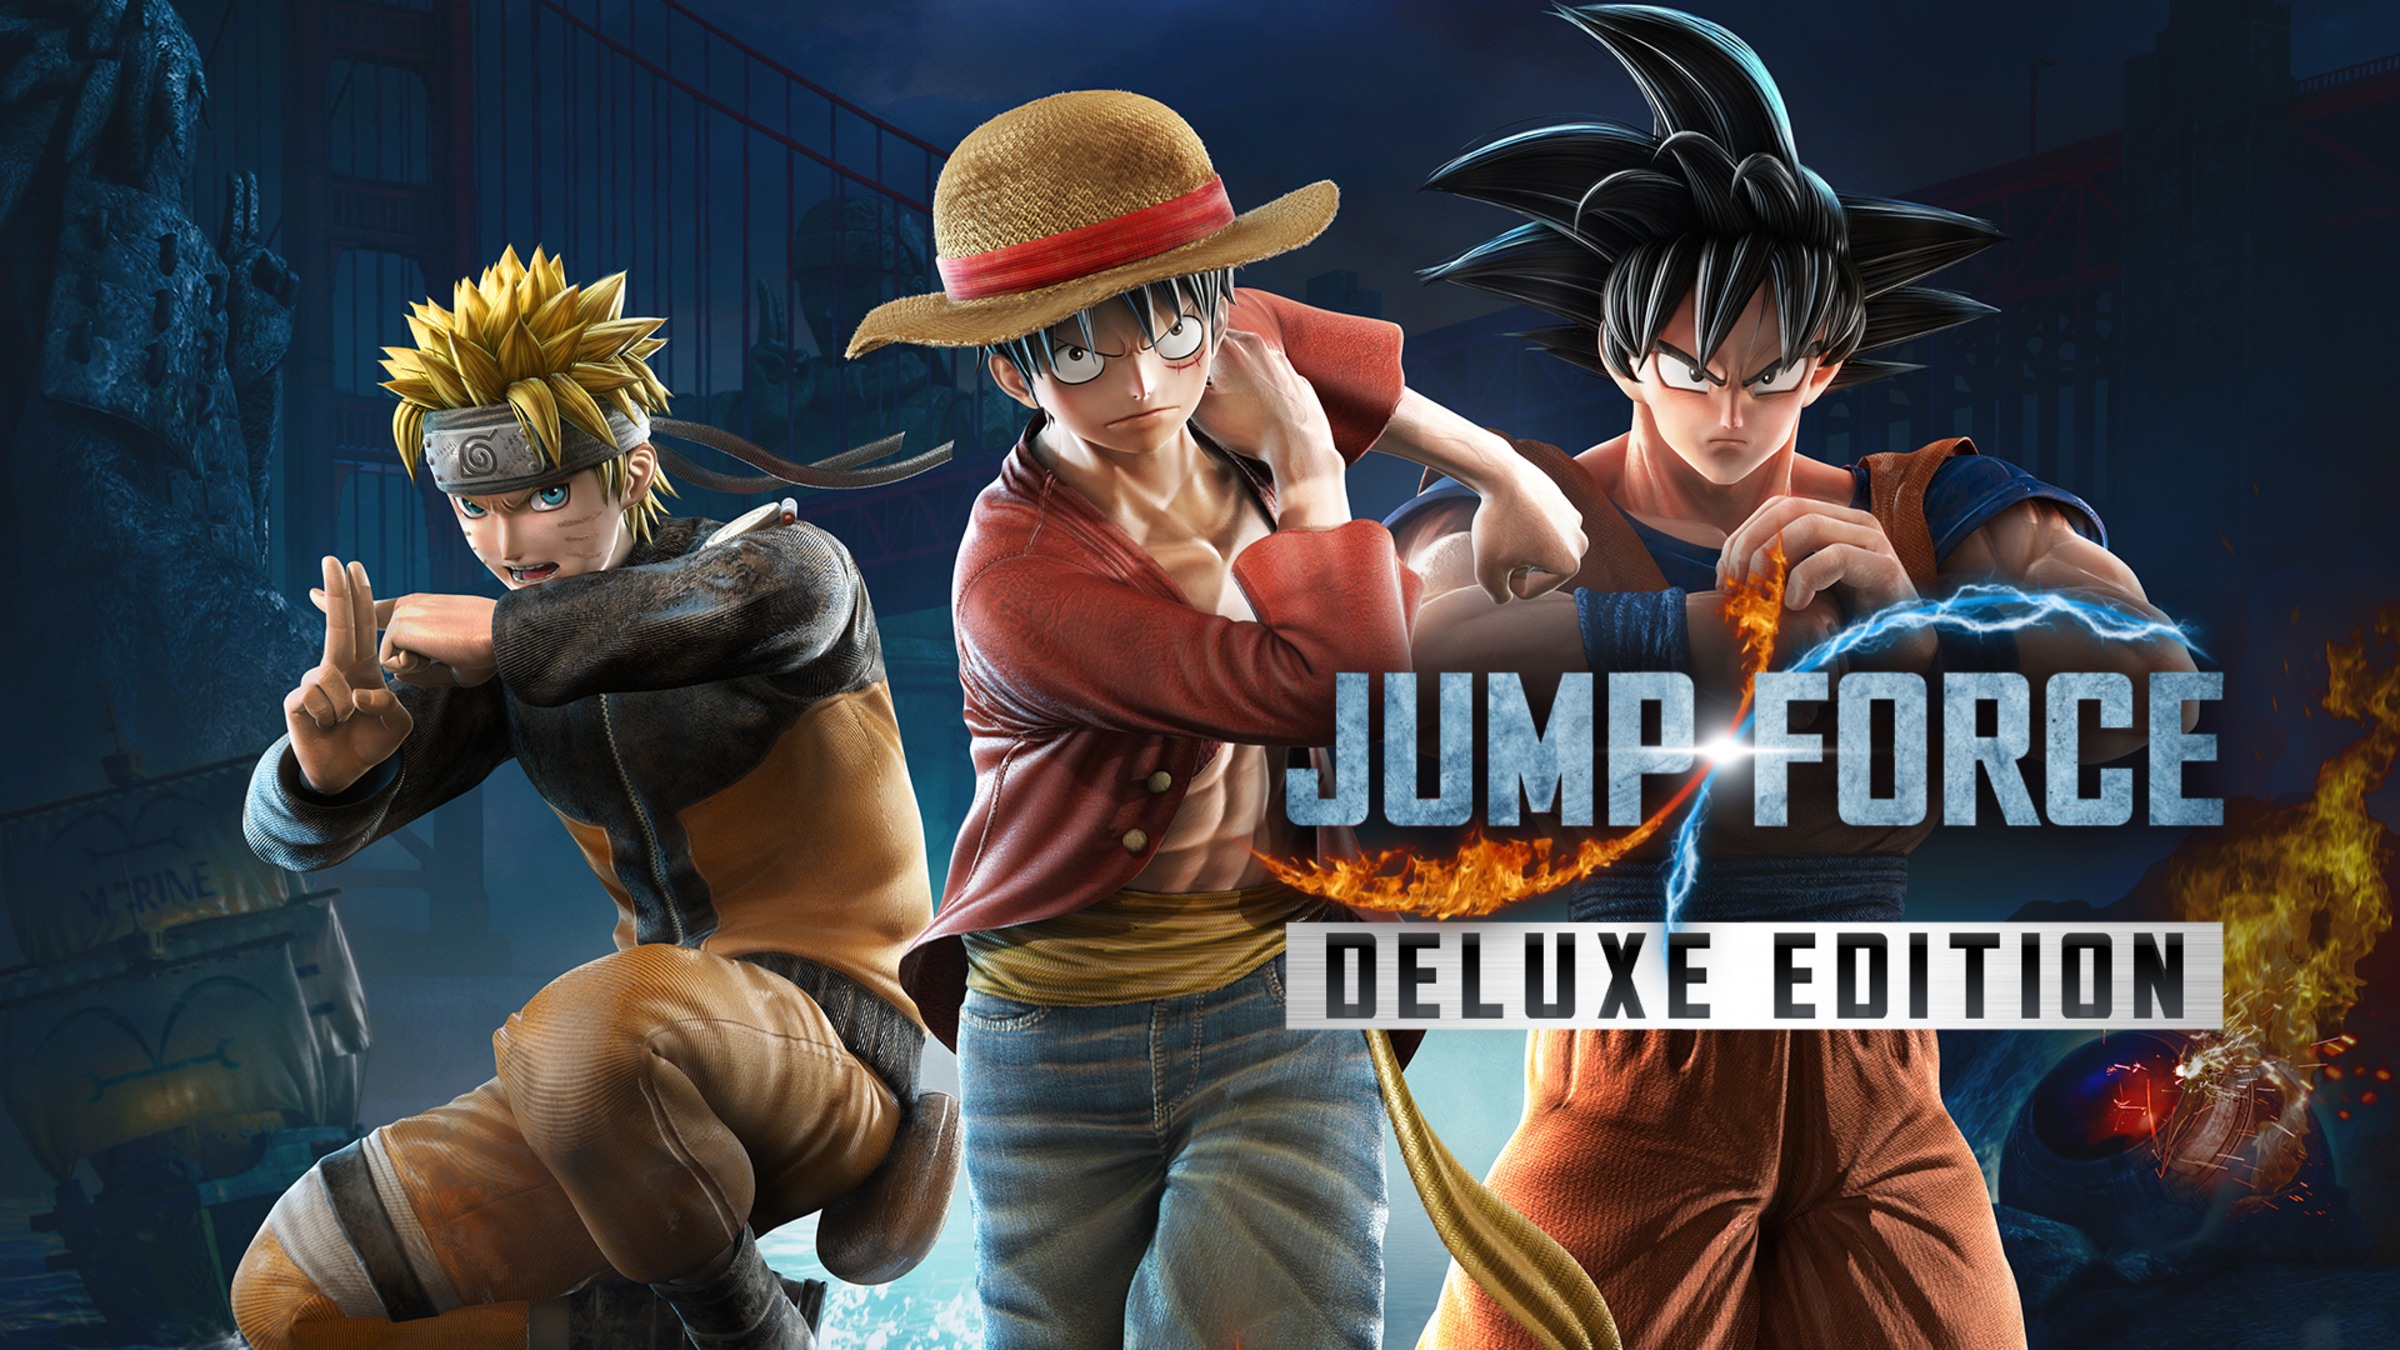 Nintendo Switch Jump Force Deluxe Edition Eng Fr Sp Us